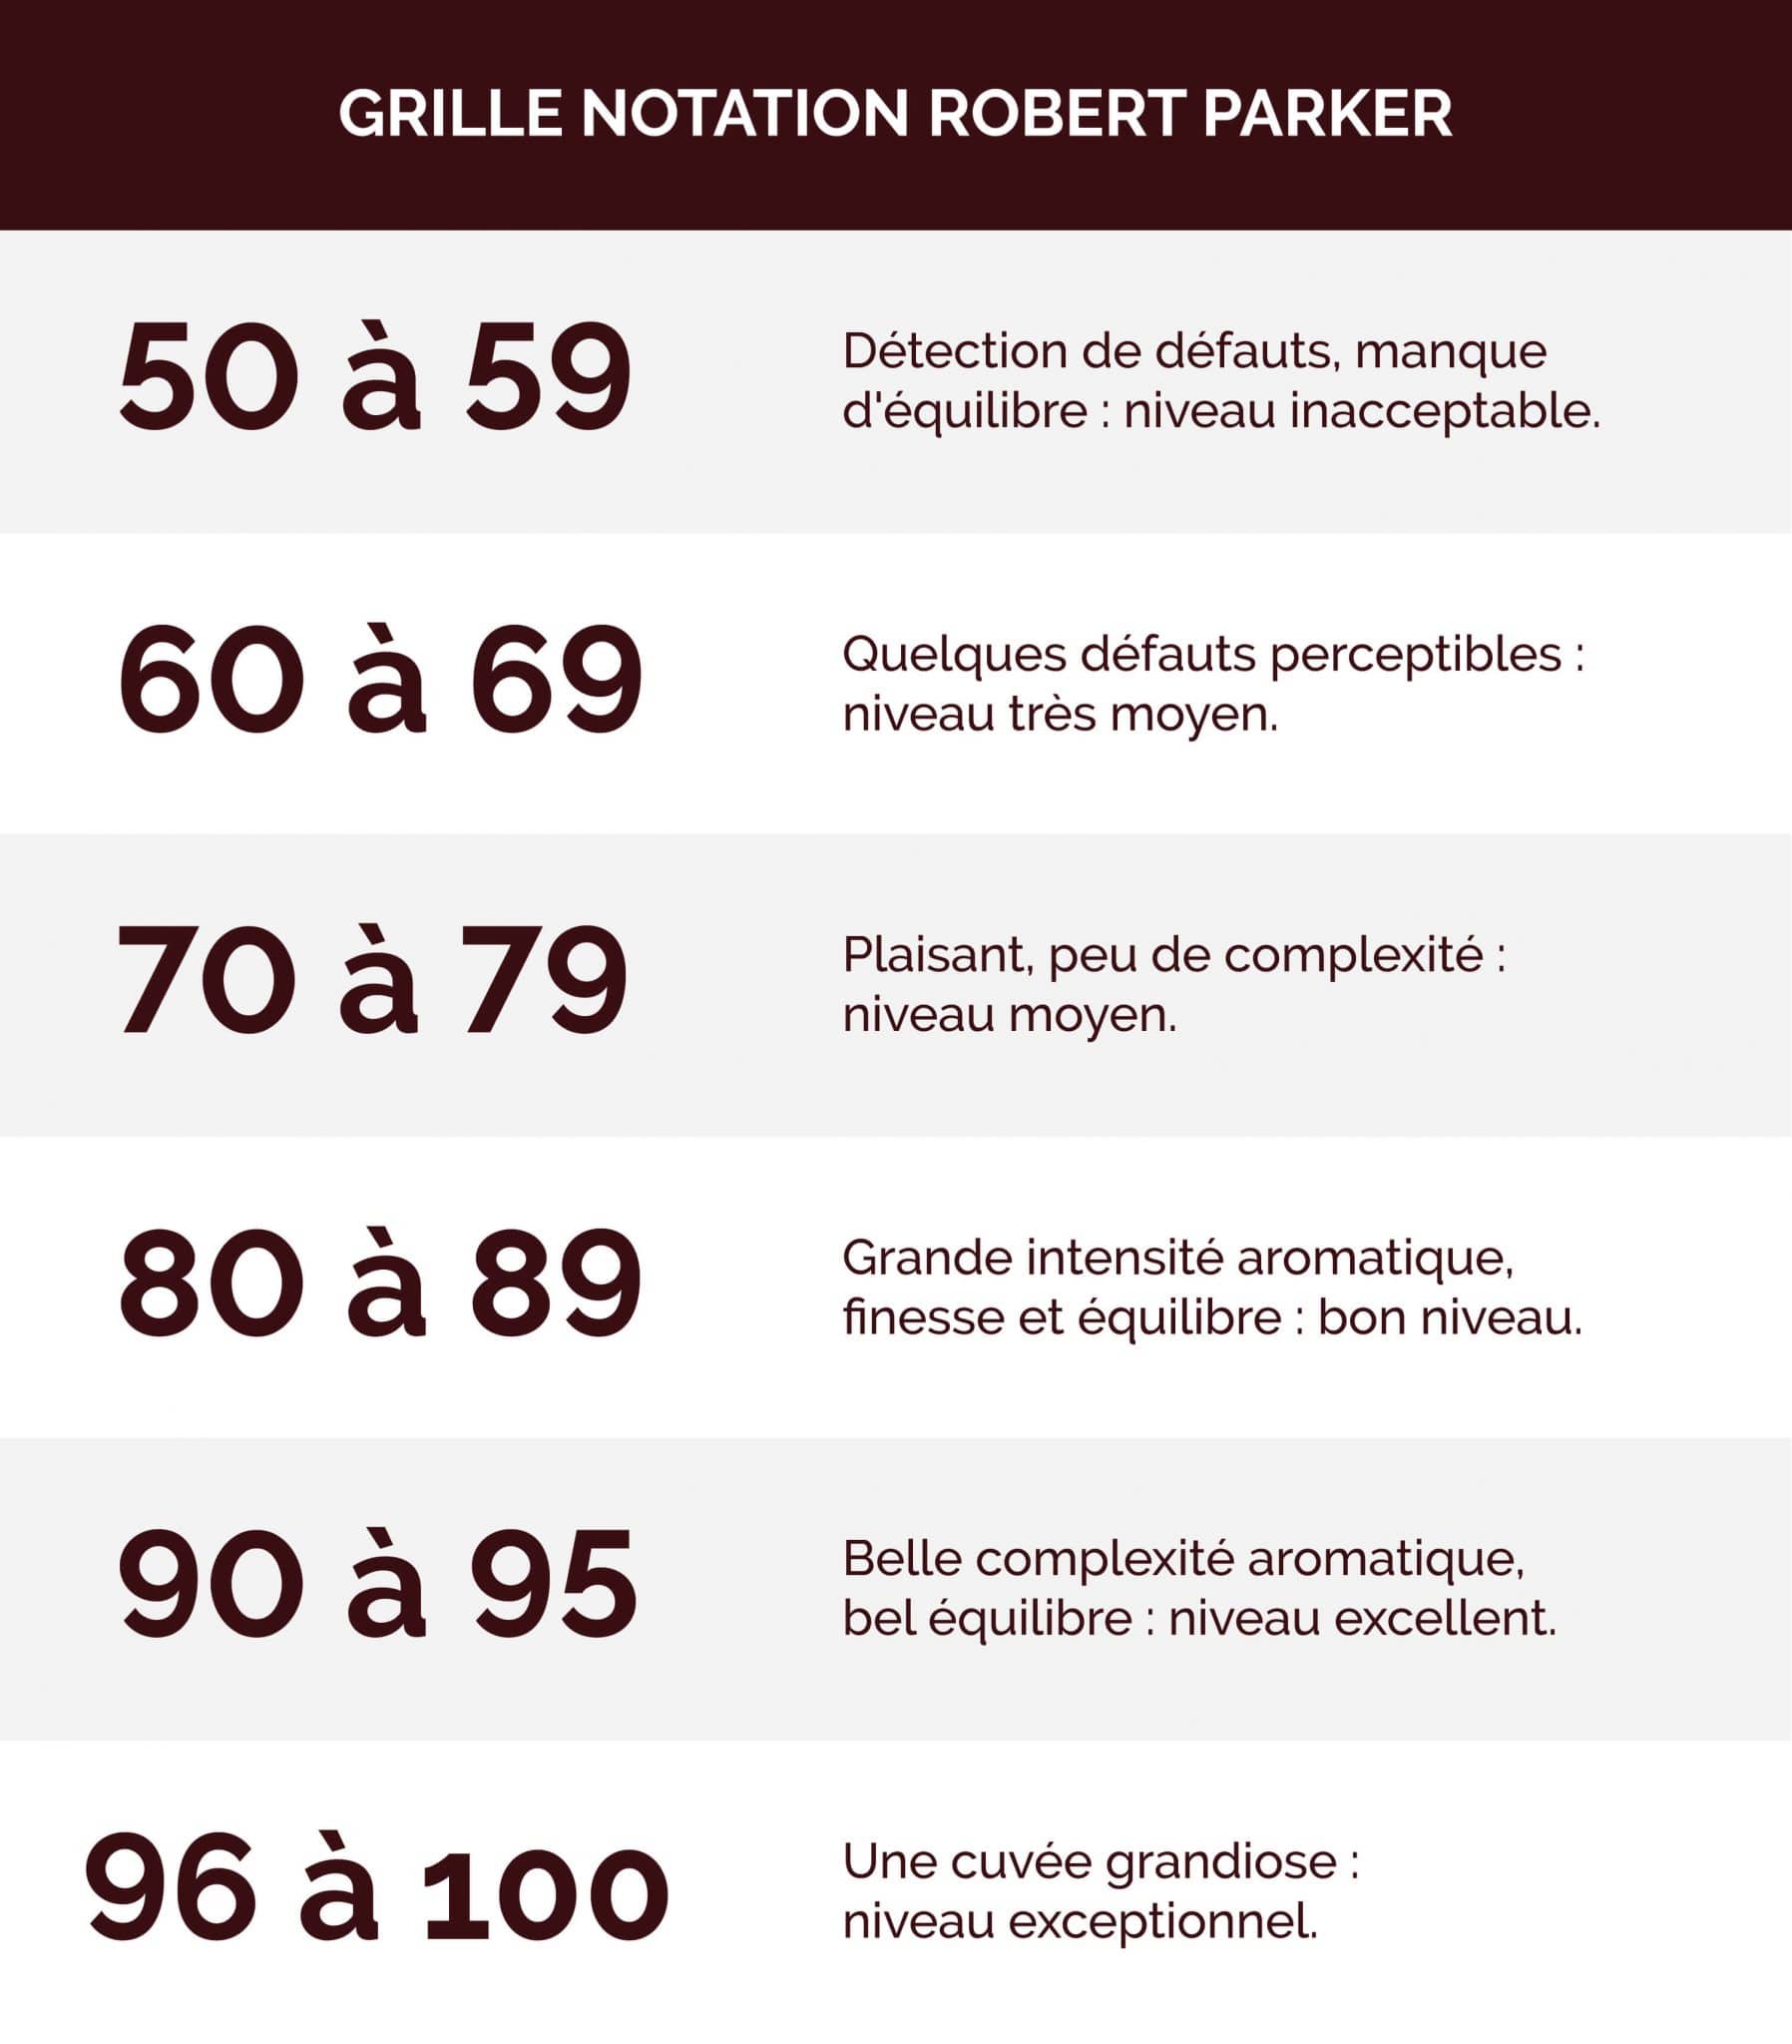 infographie-grille-notation-parker-1-1-scaled-1